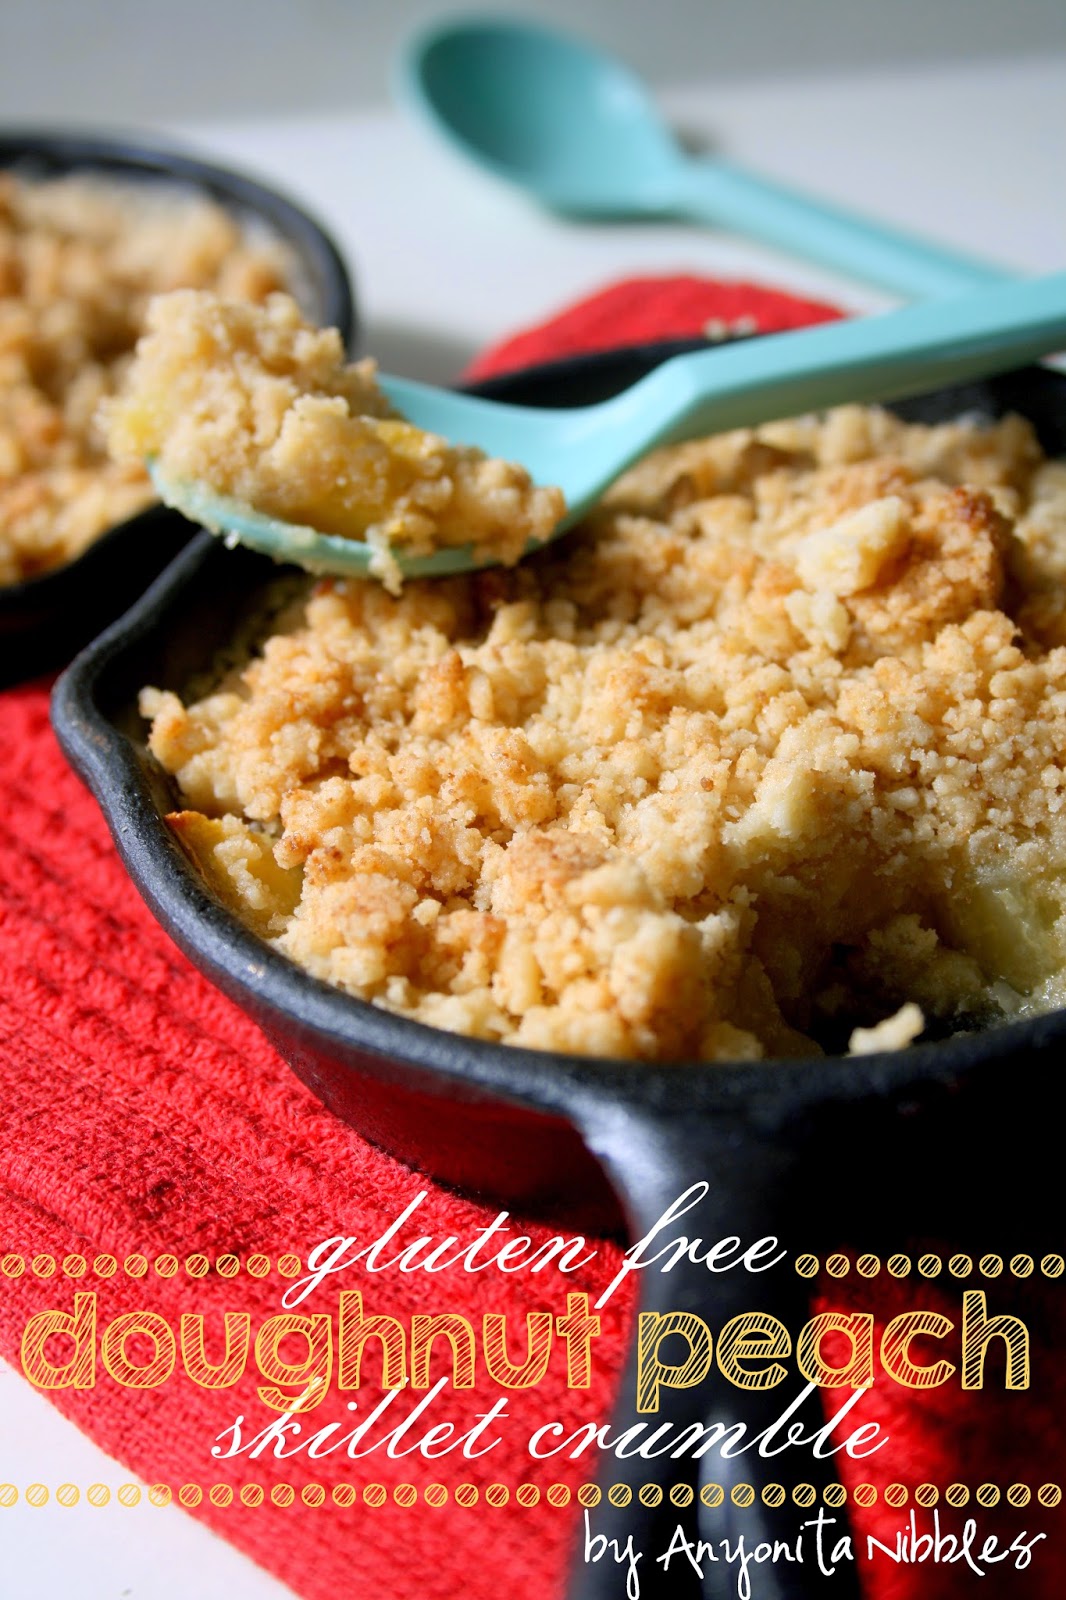 10 minute #glutenfree and #paleo doughnut peach skillet crumble from Anyonita Nibbles